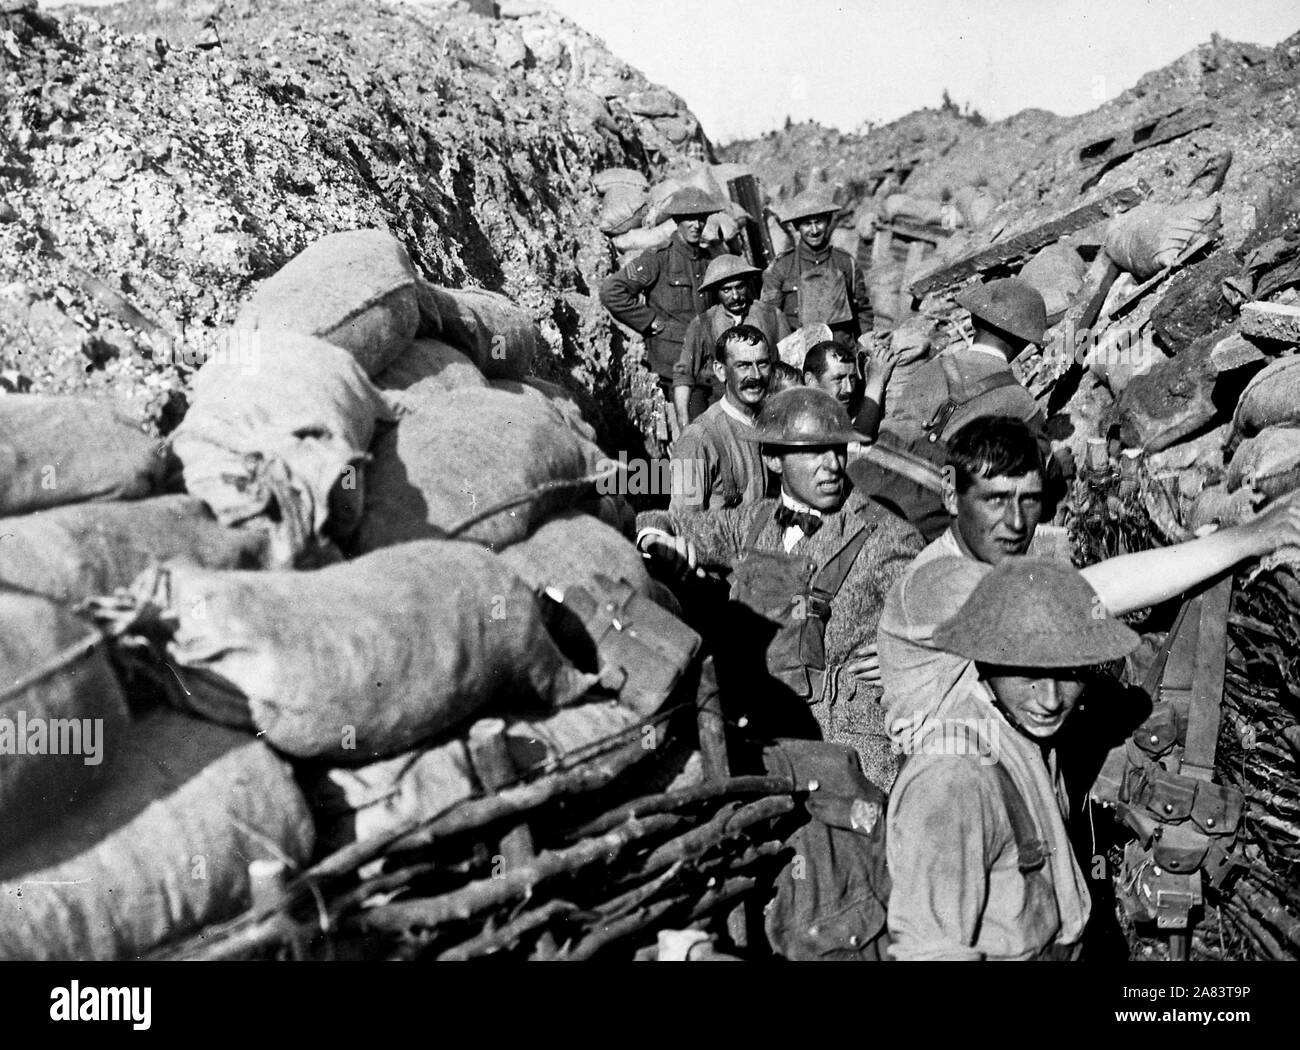 Repairing front line trench after bomb explosion fifty yards from enemy trenches. D. W. Griffith in civilian clothing. During filming of the motion picture, the World War I film,  'Hearts of the World' in France, 1917. Stock Photo